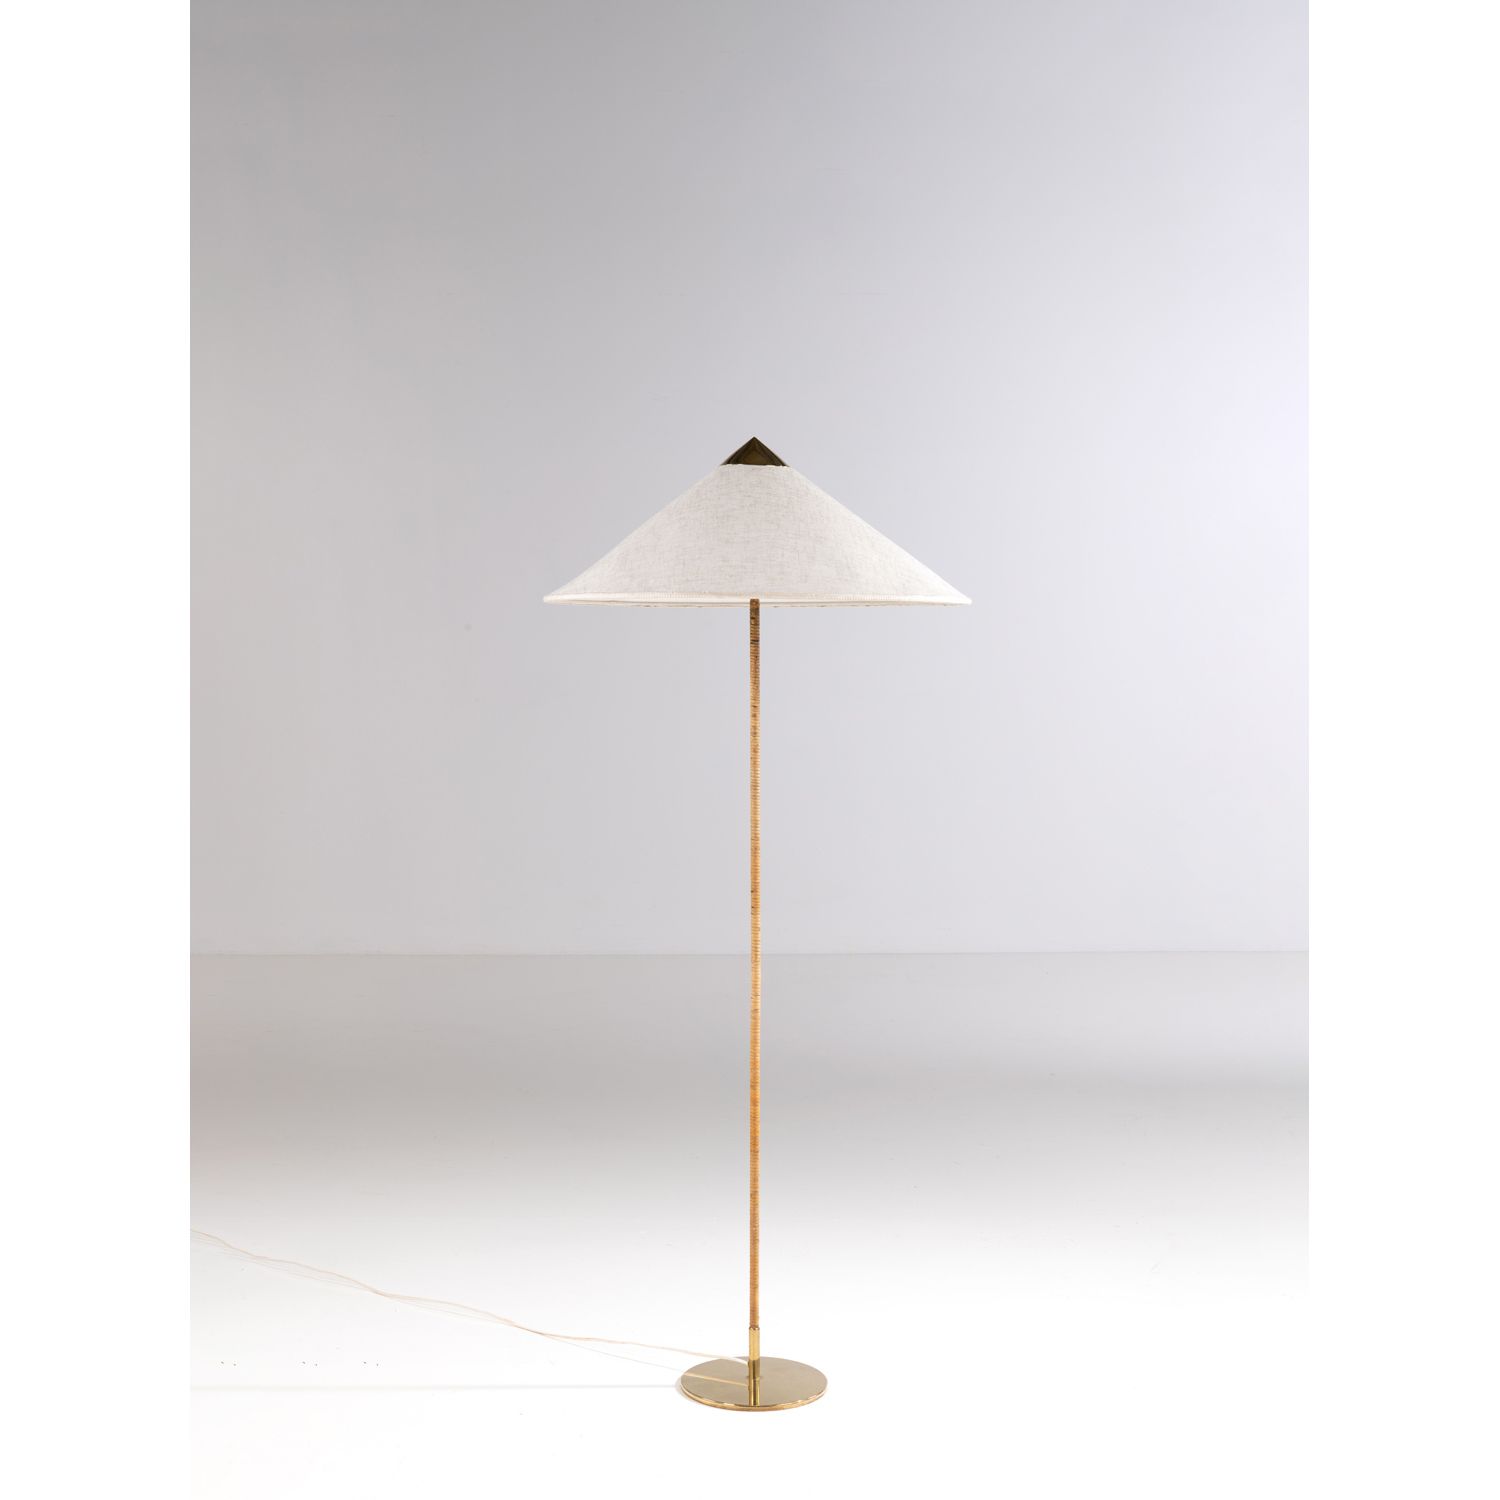 Null Paavo Tynell (1890-1973)

Modèle n° 9602

Lampadaire

Laiton, rotin et text&hellip;